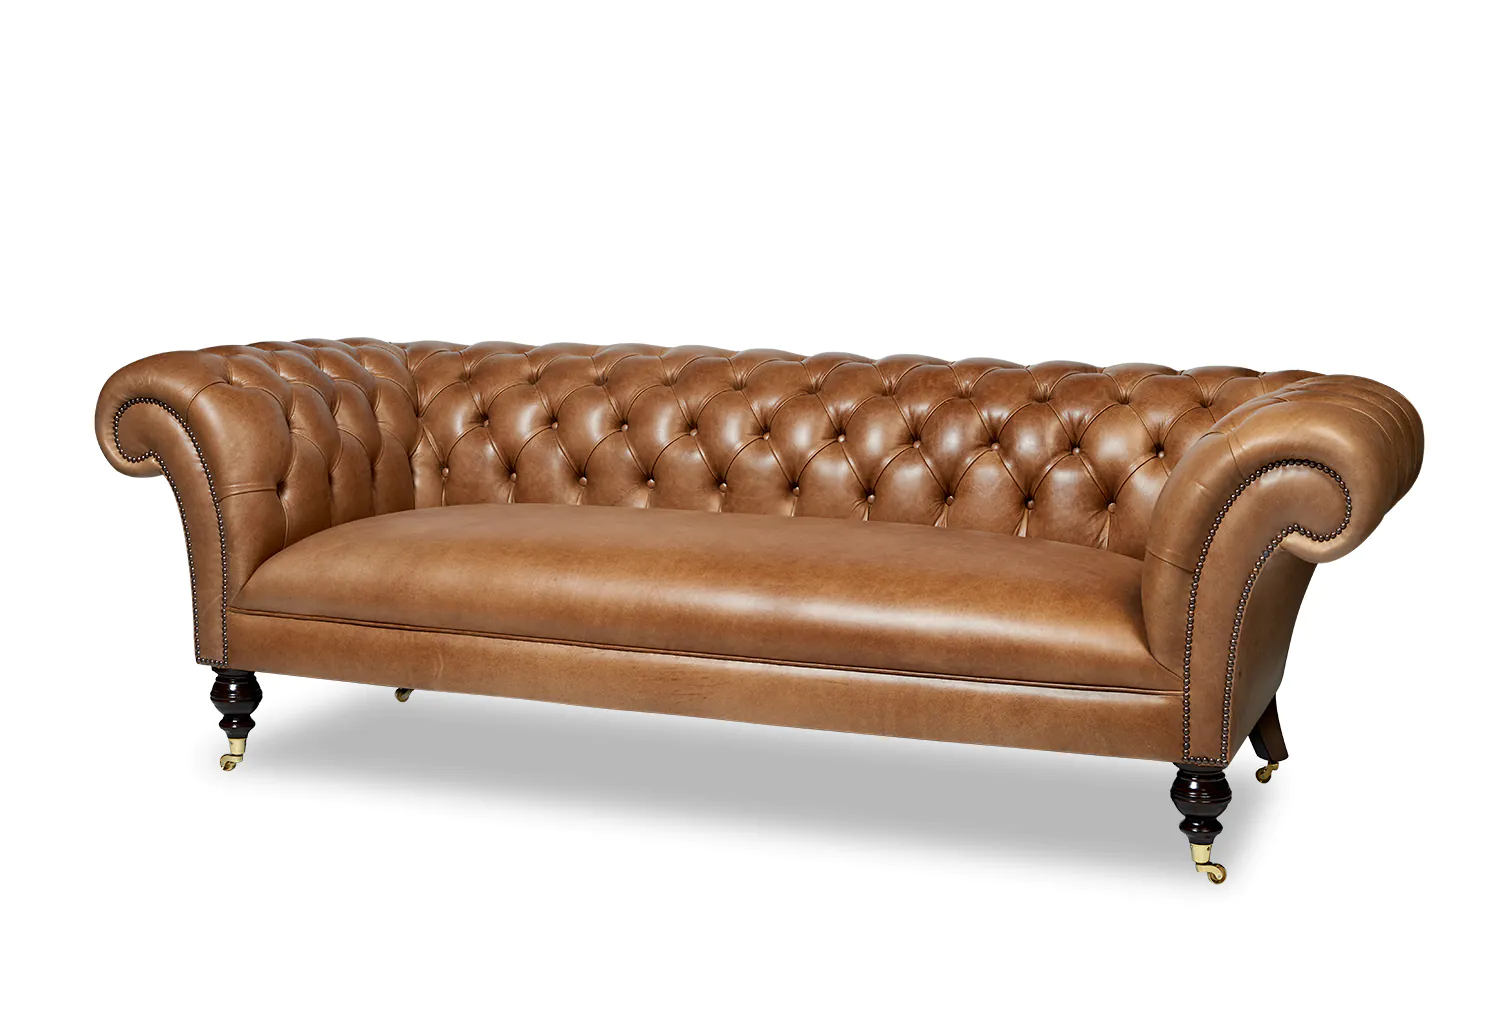 Victorian Chesterfield Sofa Westwick